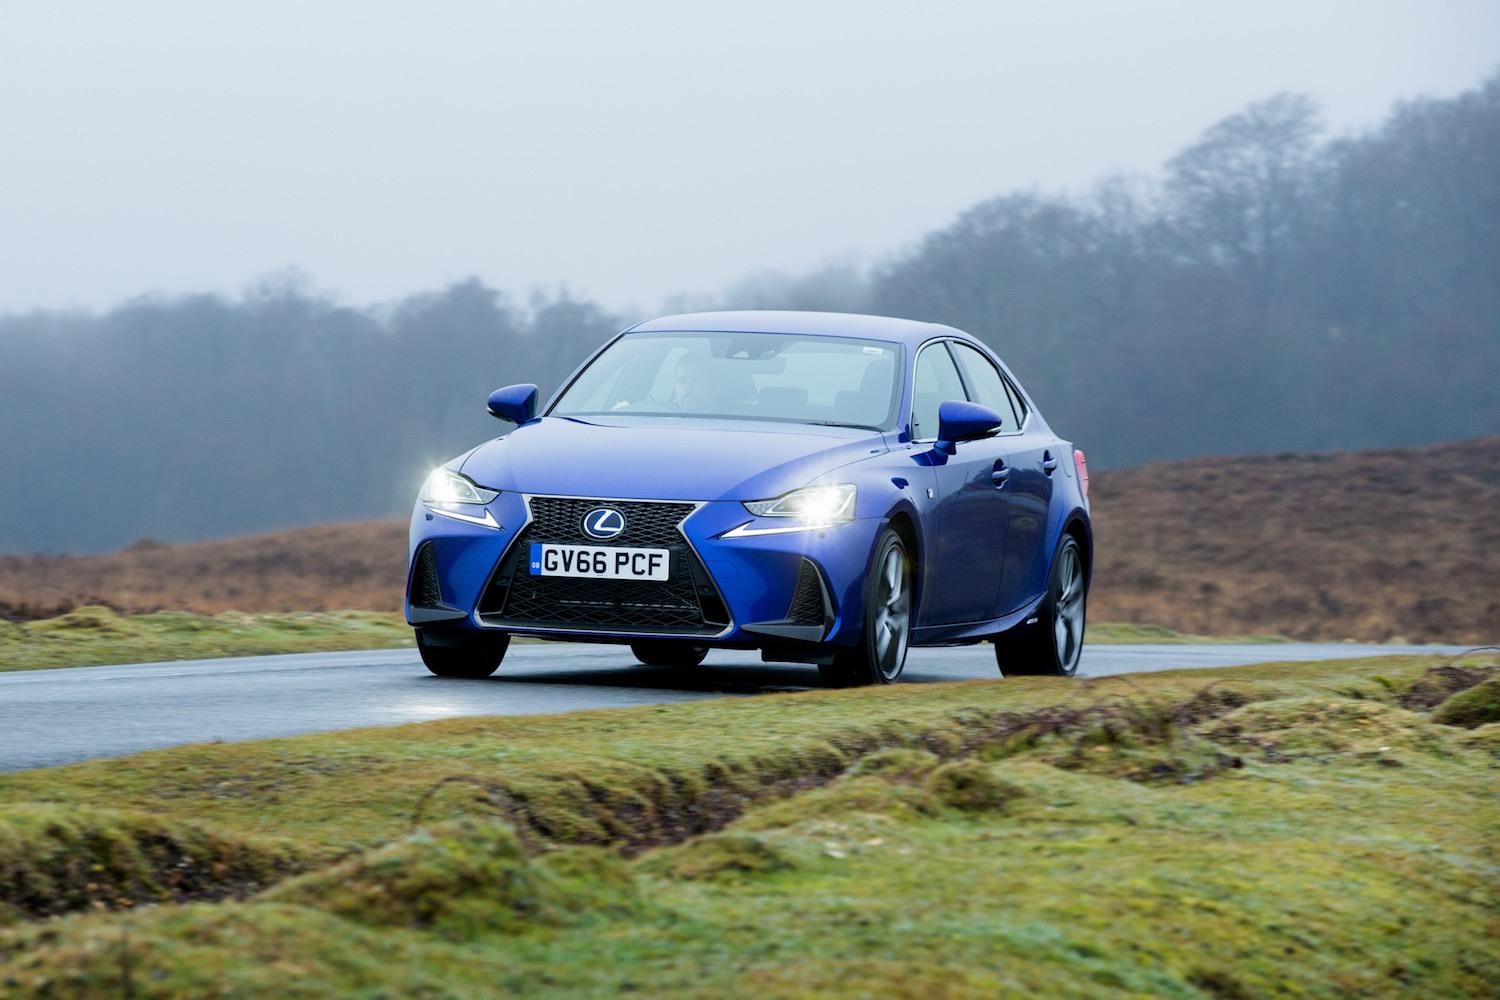 Neil Lyndon reviews the Lexus IS300h for Drive 4